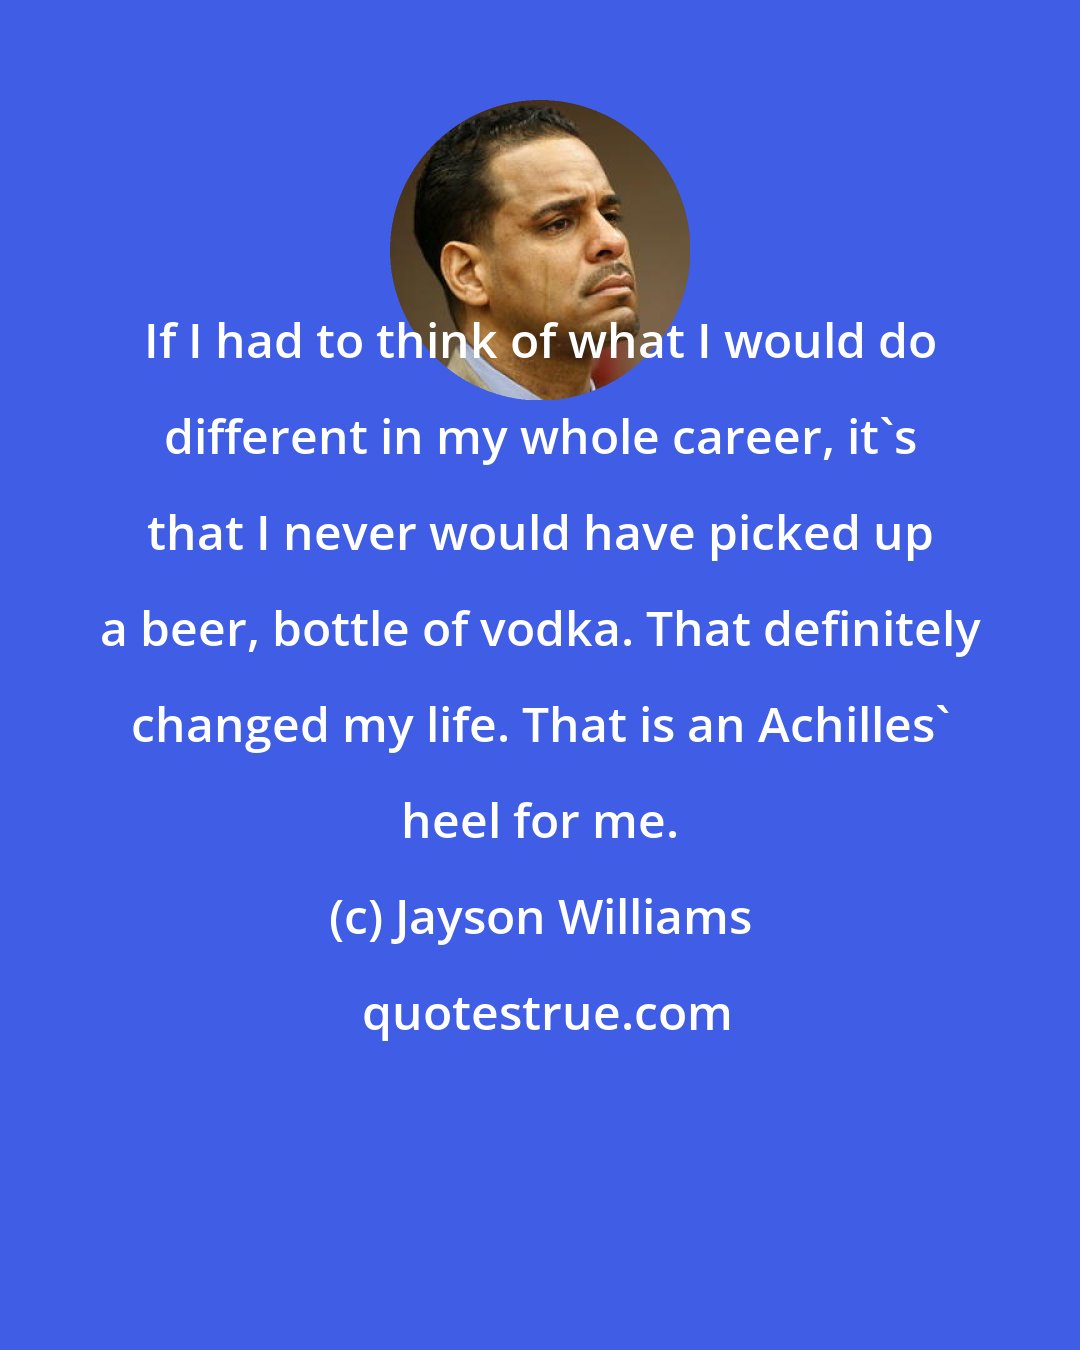 Jayson Williams: If I had to think of what I would do different in my whole career, it's that I never would have picked up a beer, bottle of vodka. That definitely changed my life. That is an Achilles' heel for me.